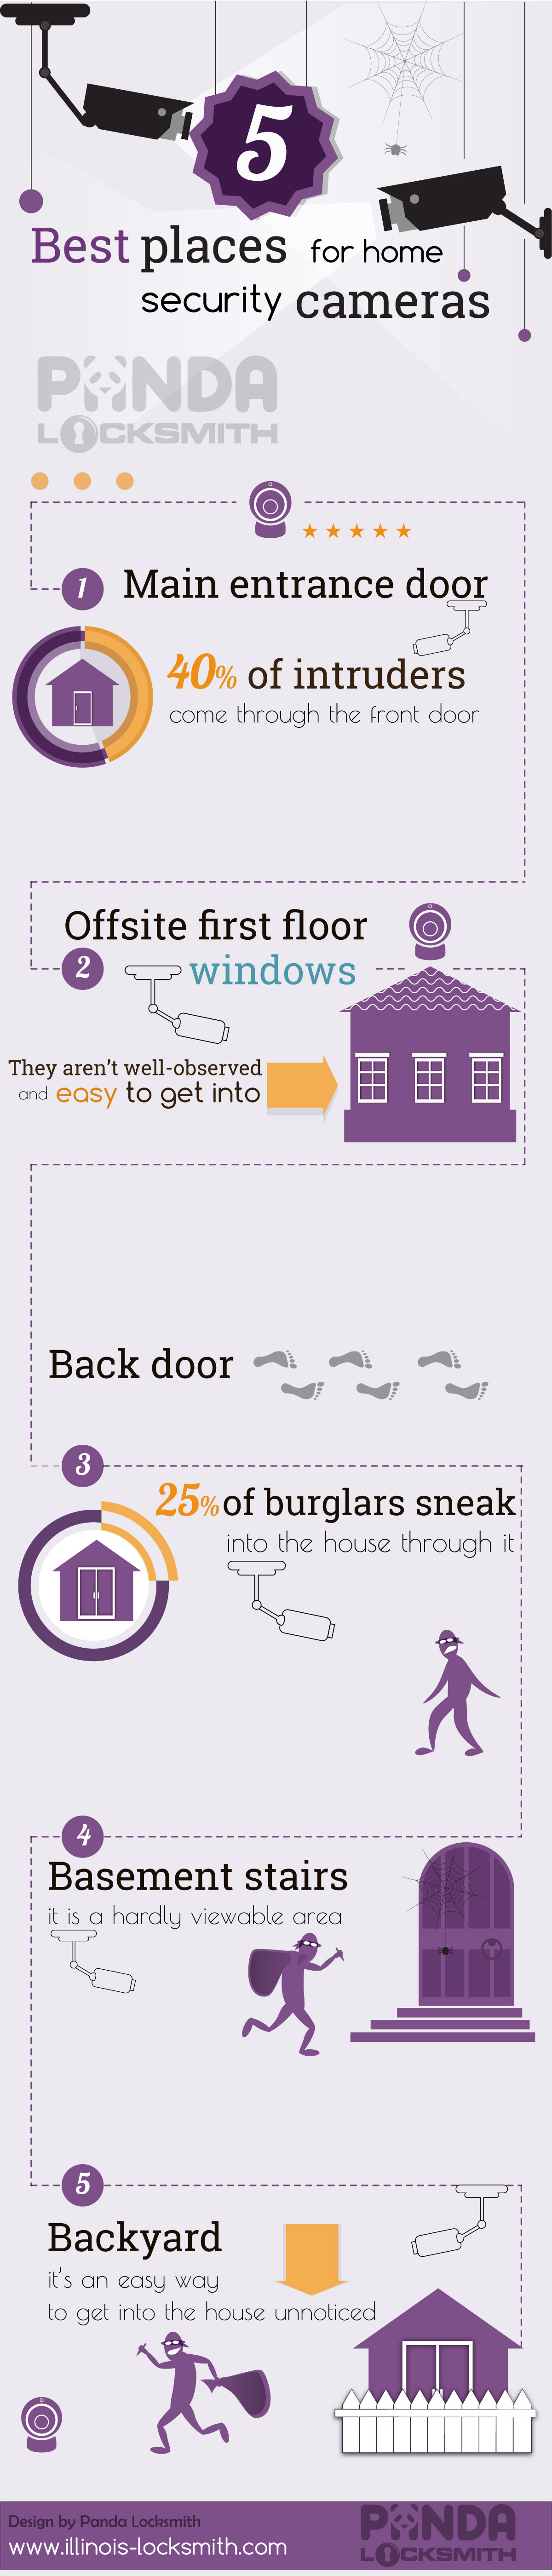 5 best places for home security cameras - infographic